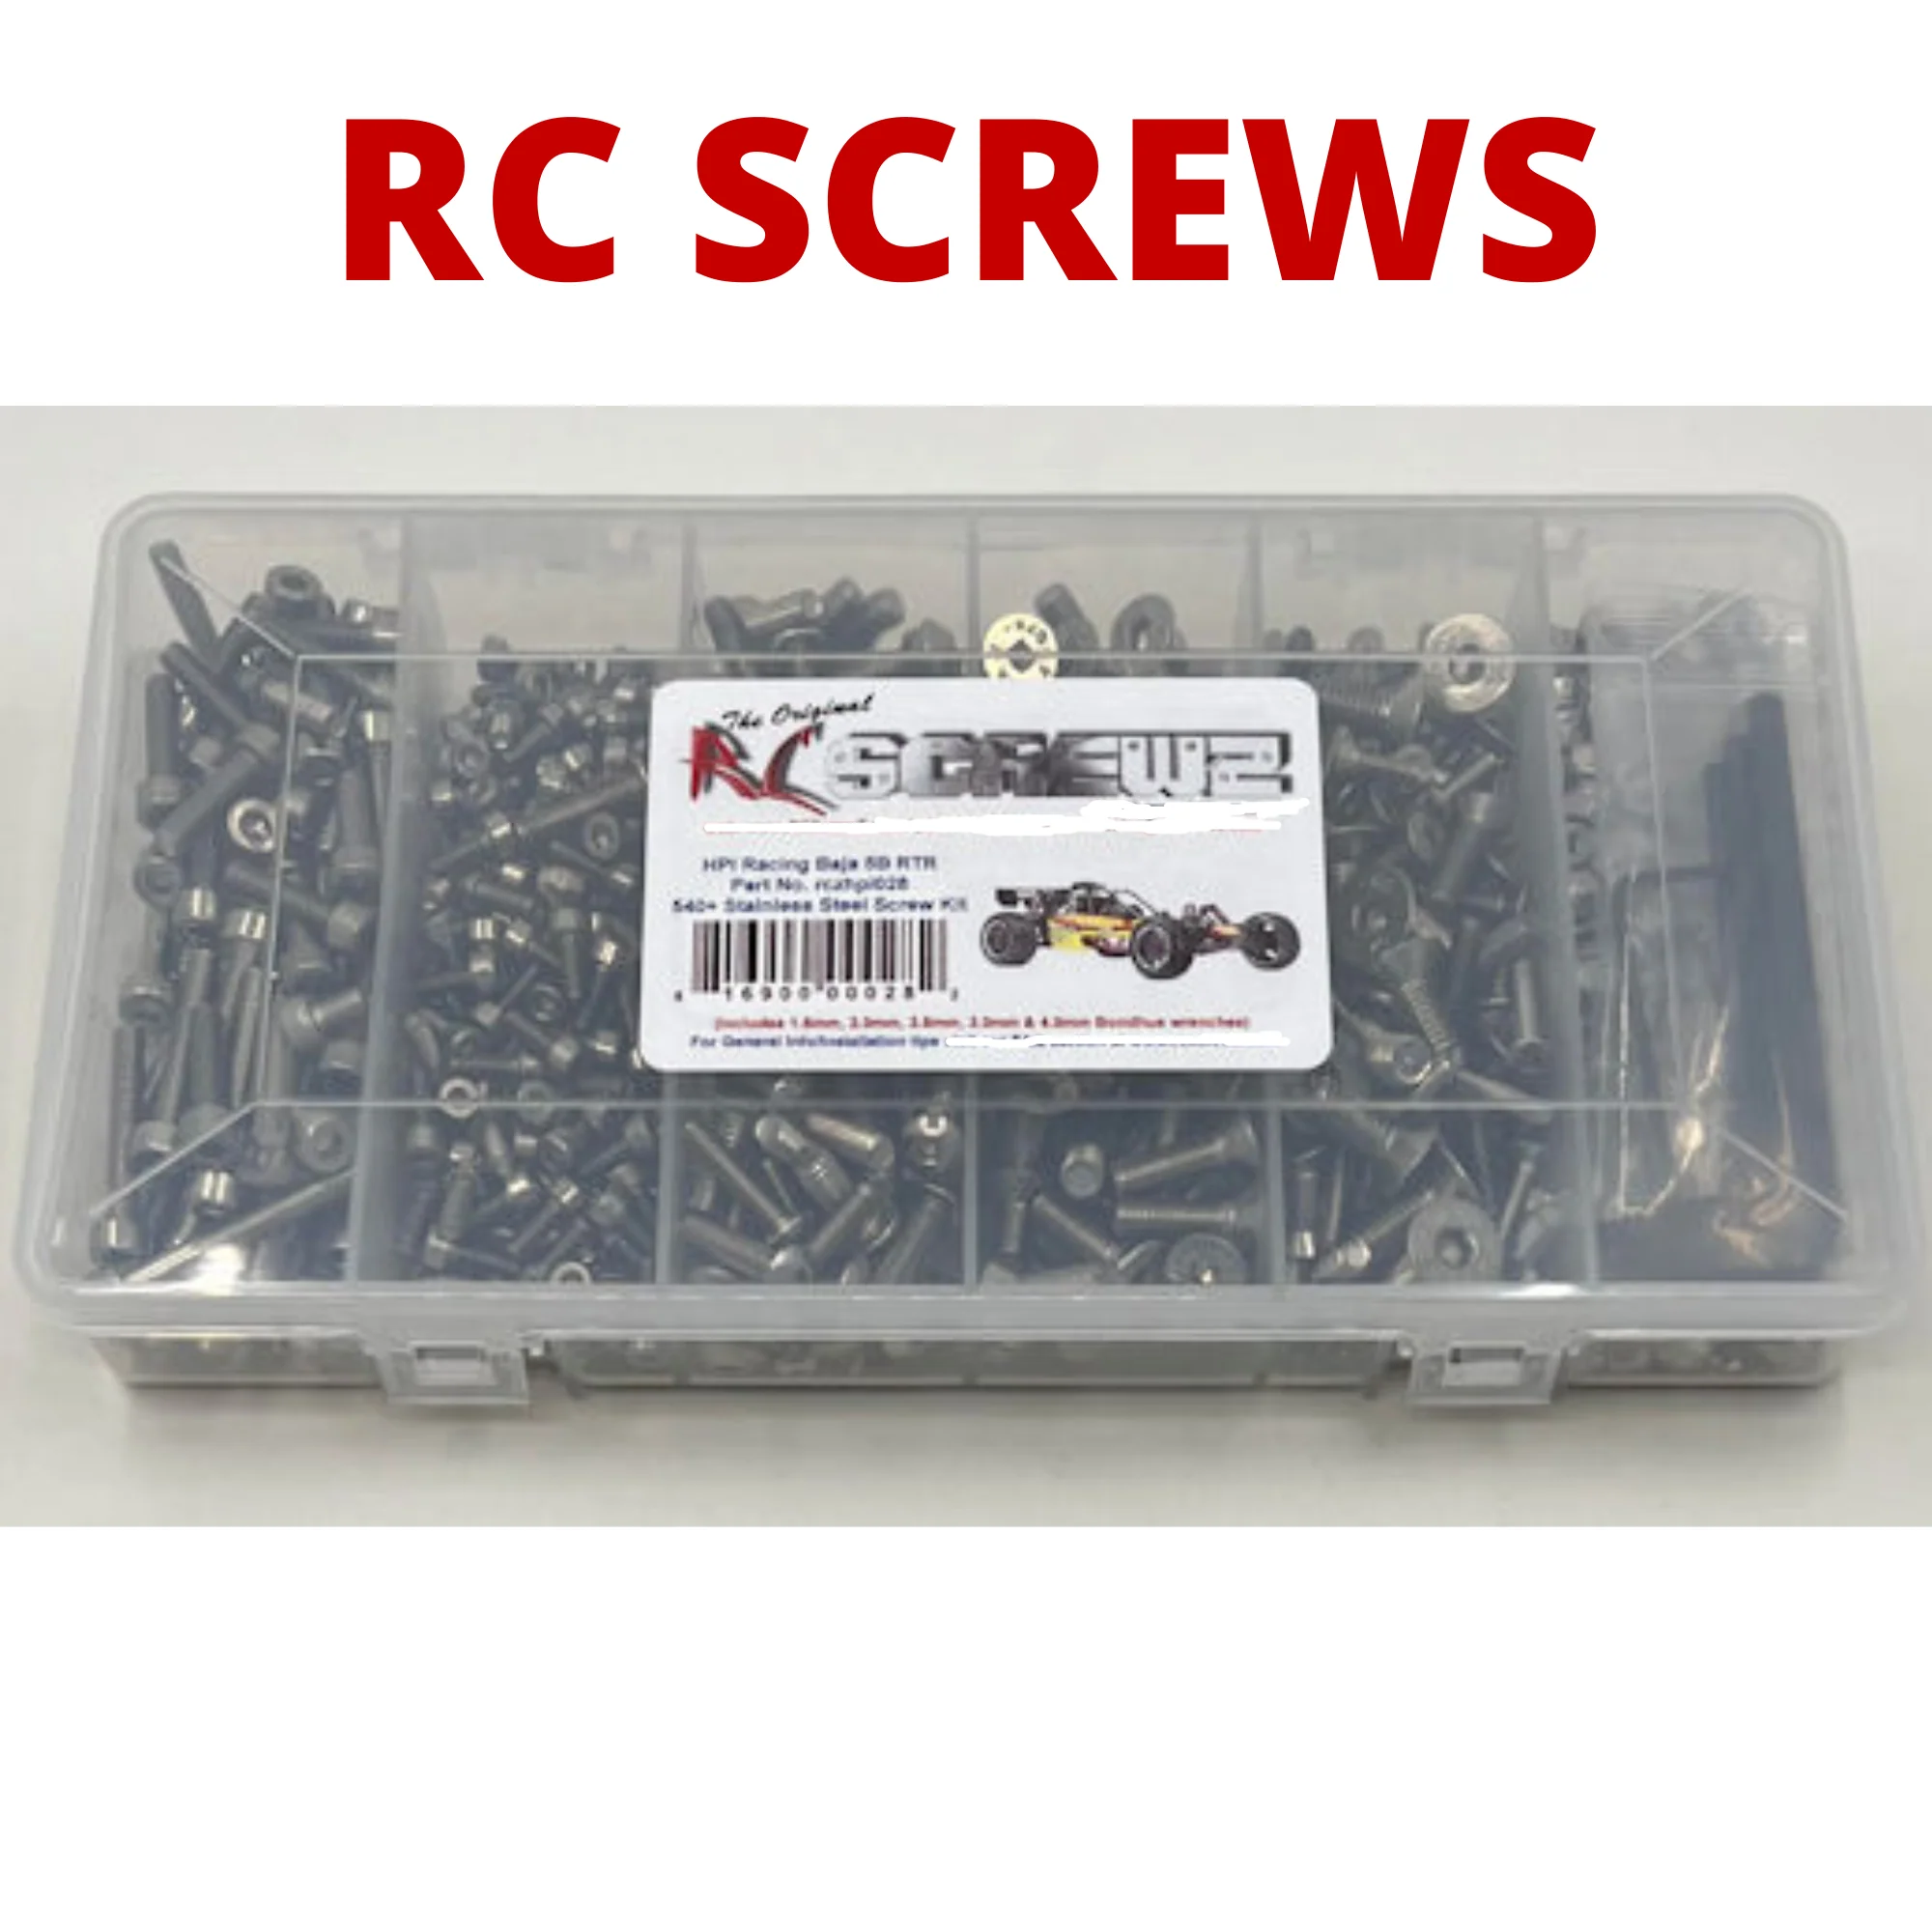 RCScrewZ Stainless Screw Kit+ hpi028 for HPI Racing 1/5 Baja 5B RTR - Picture 2 of 12